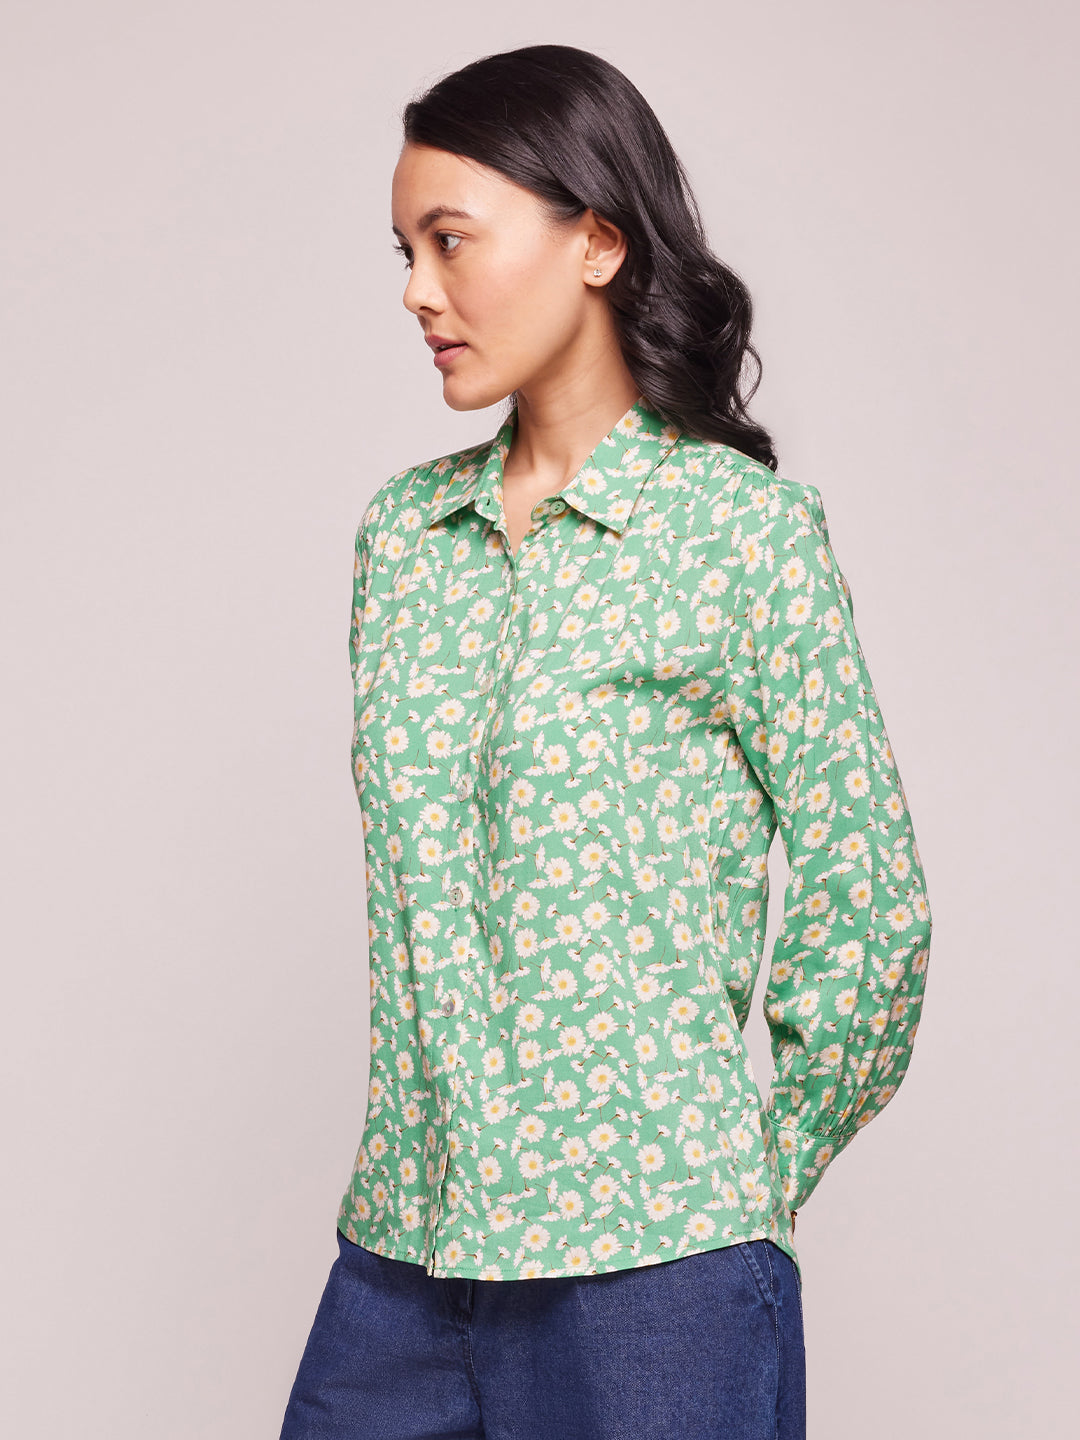 Bombay High Women's Full Sleeve Floral Print Relaxed Fit Shirt